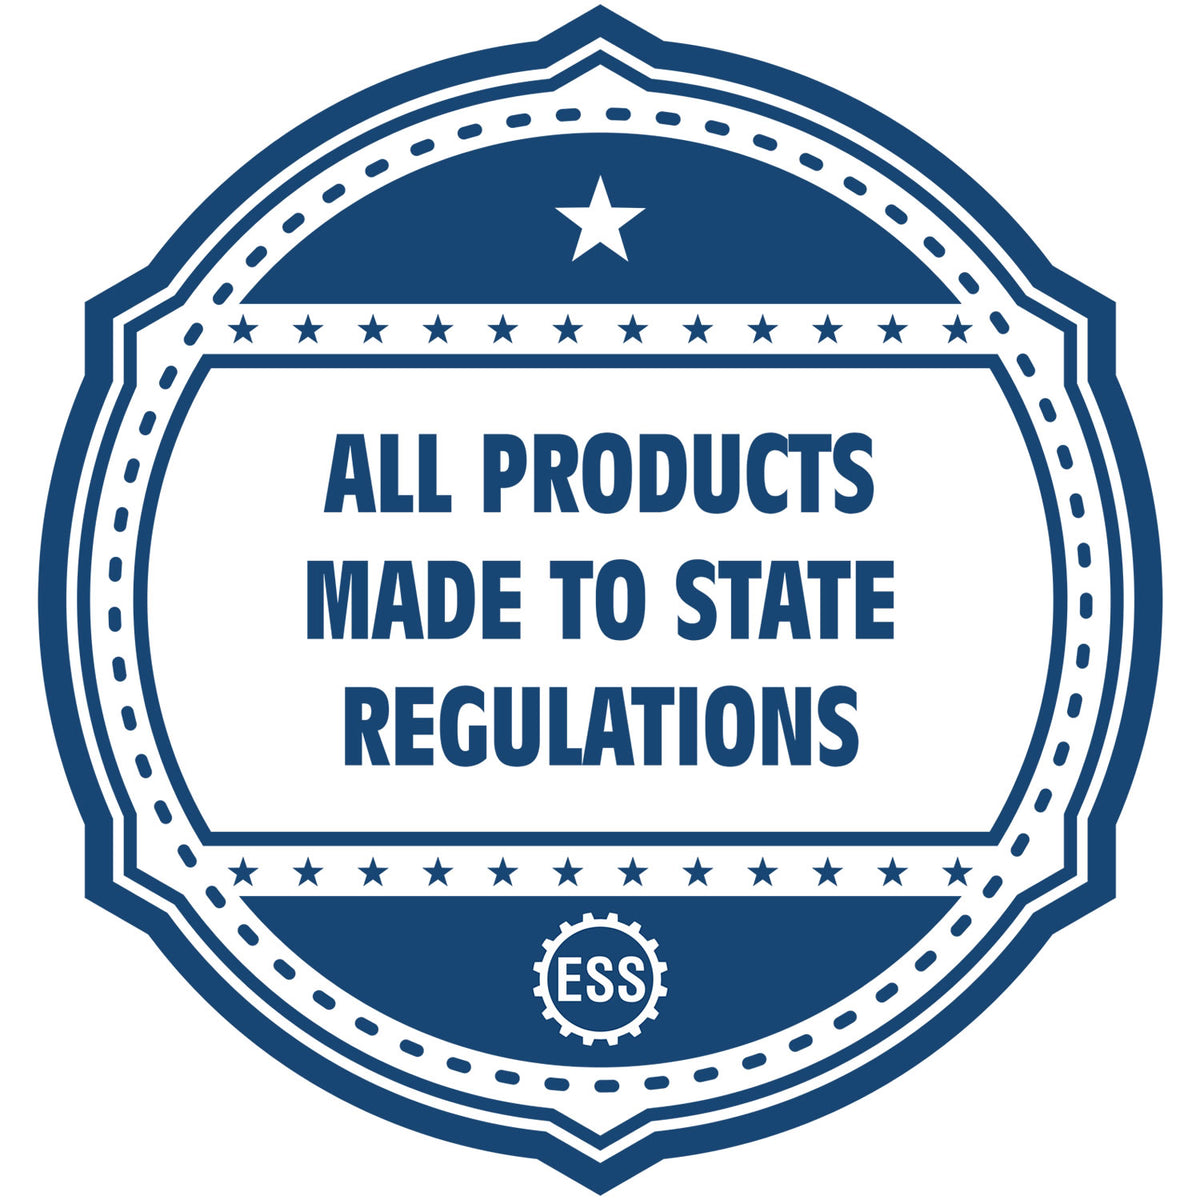 An icon or badge element for the Long Reach Missouri PE Seal showing that this product is made in compliance with state regulations.